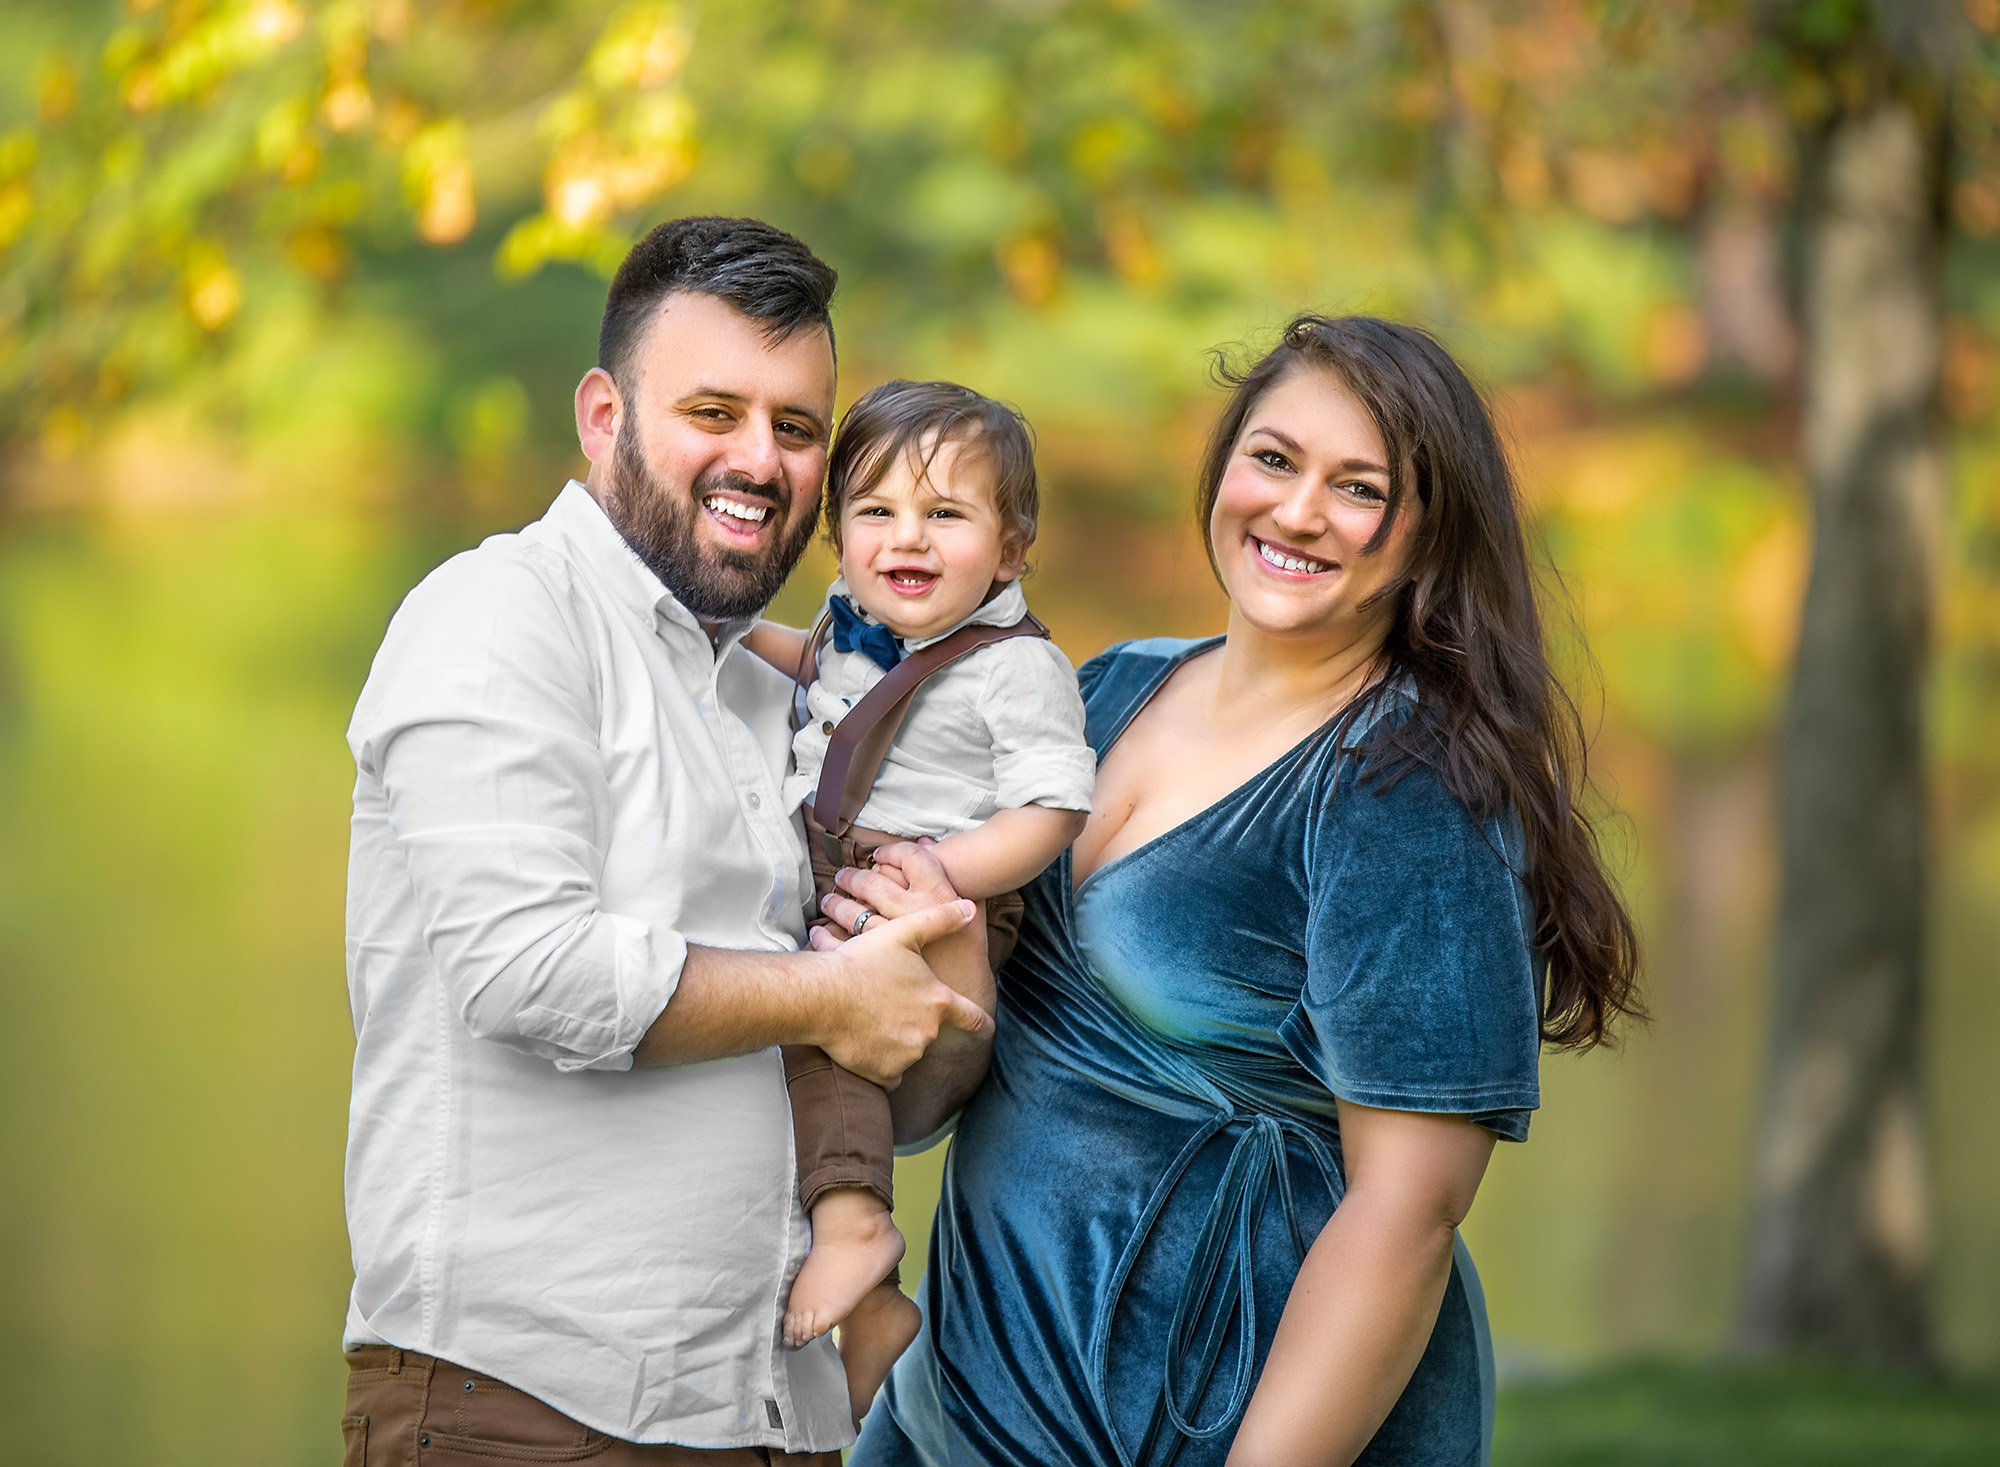 parents holding their one year old smiling boy outside